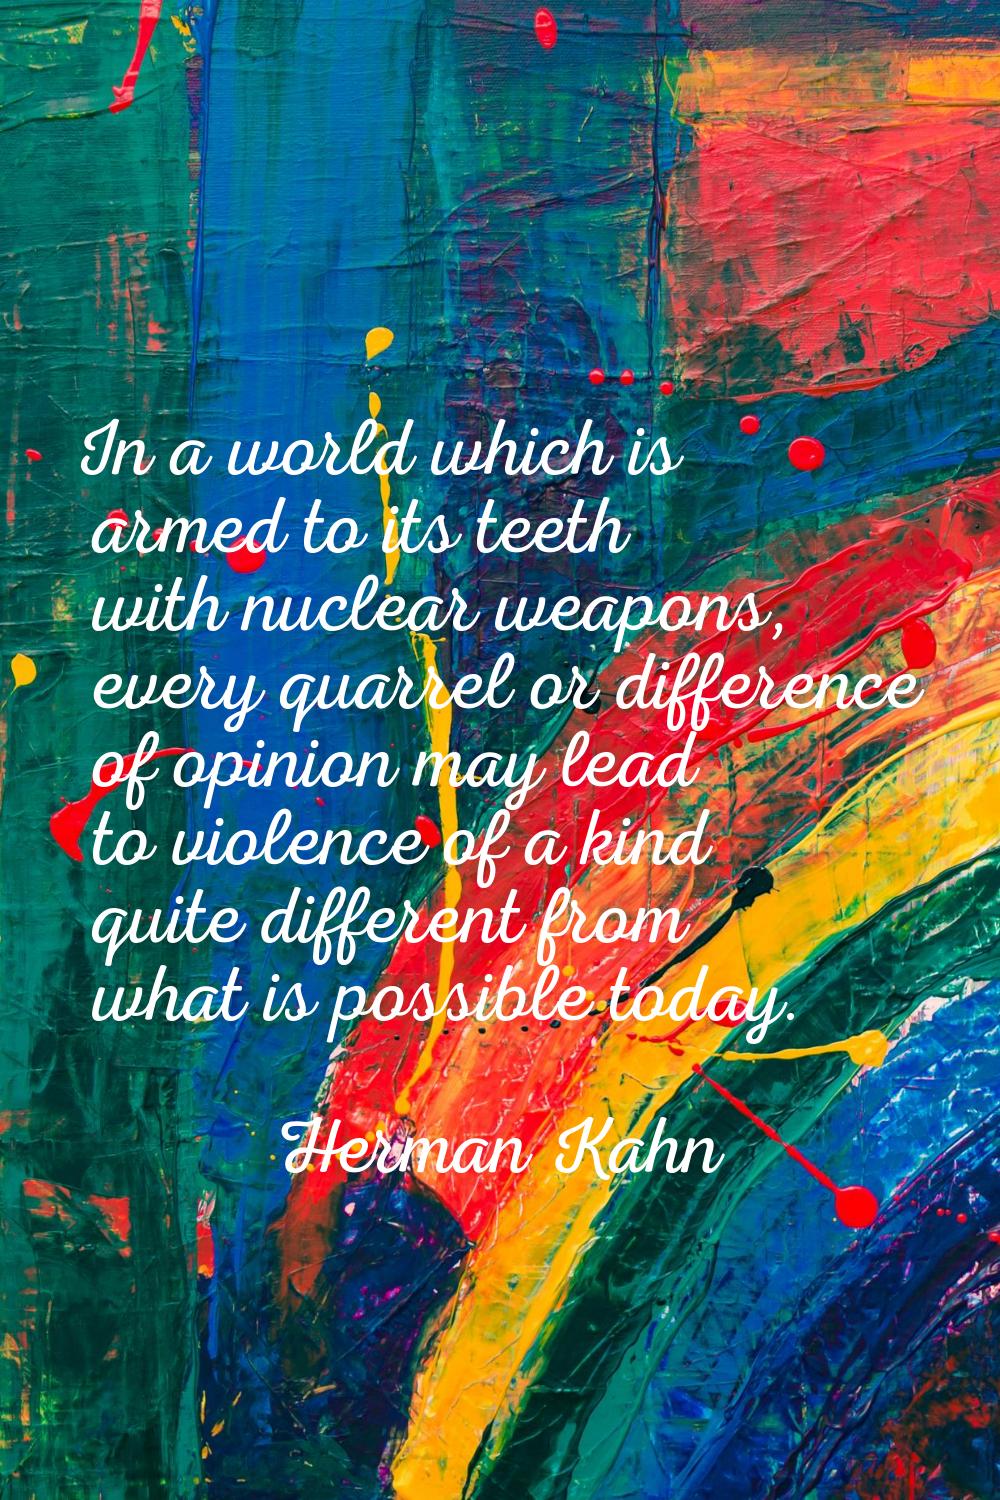 In a world which is armed to its teeth with nuclear weapons, every quarrel or difference of opinion